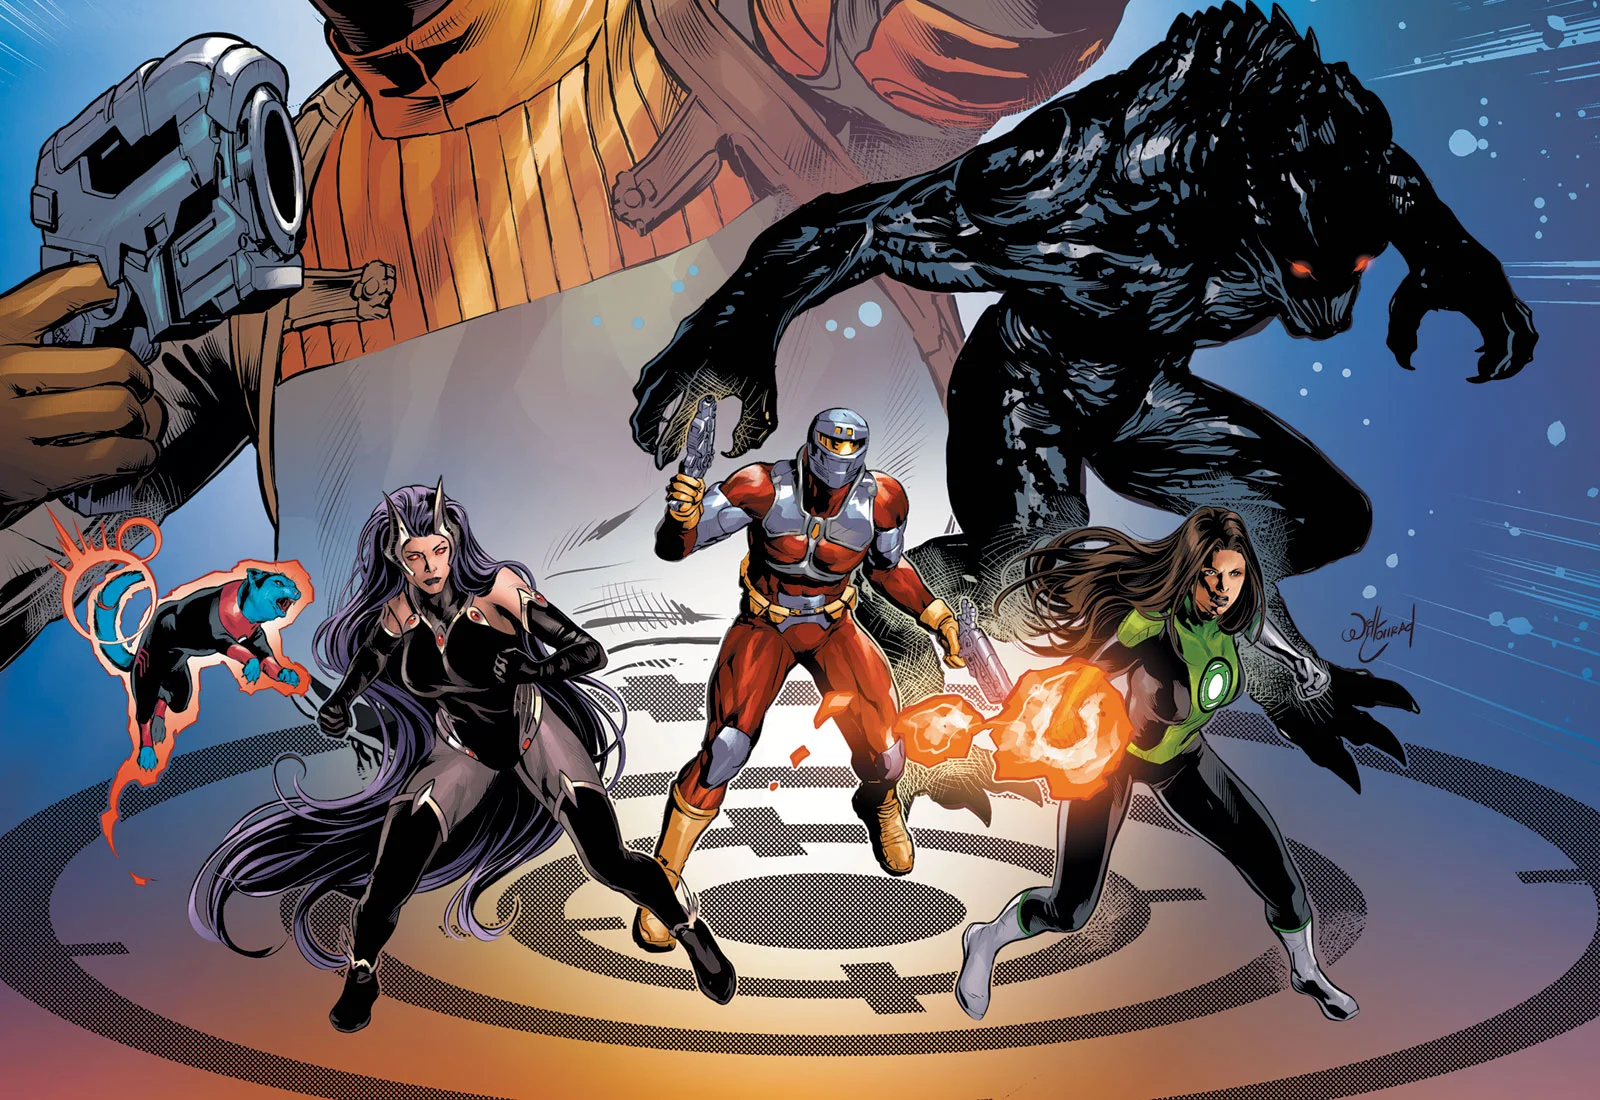 Dan Abnett introduces DC's Guardians Of The Galaxy